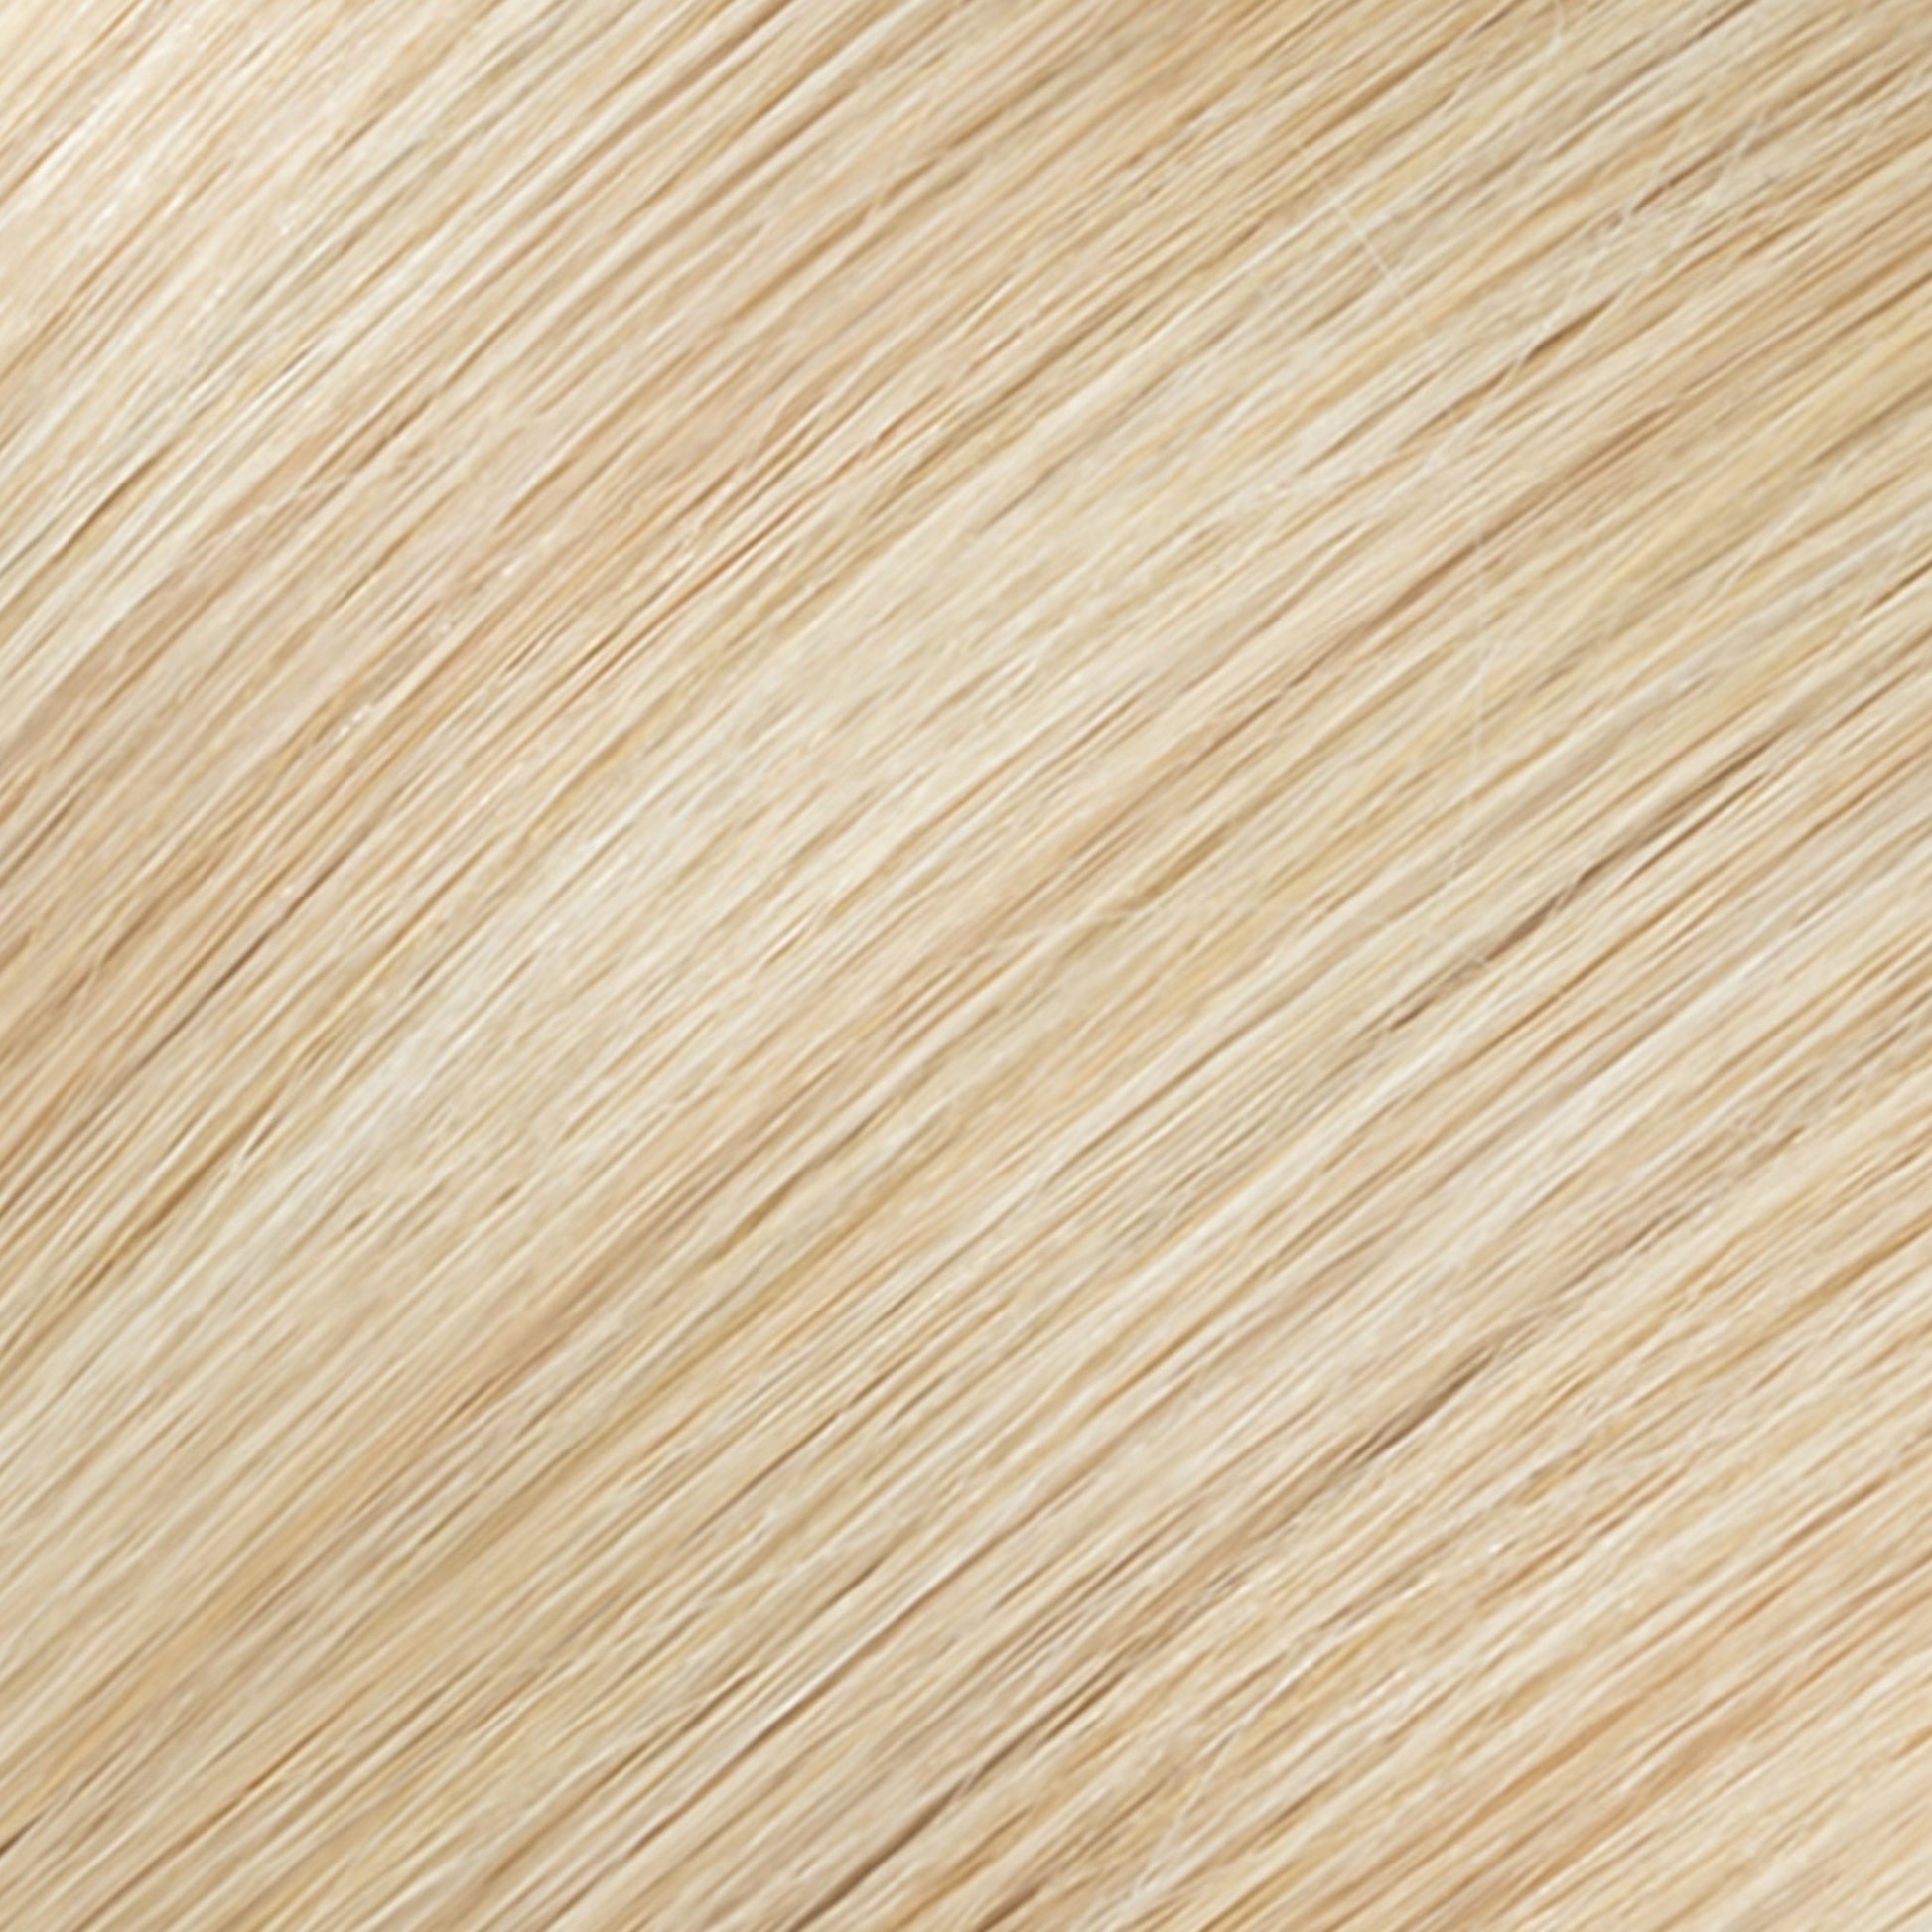 Ash Blonde Highlighted Tape In Hair Extensions Invisible Weft 20 PCS segohair.com